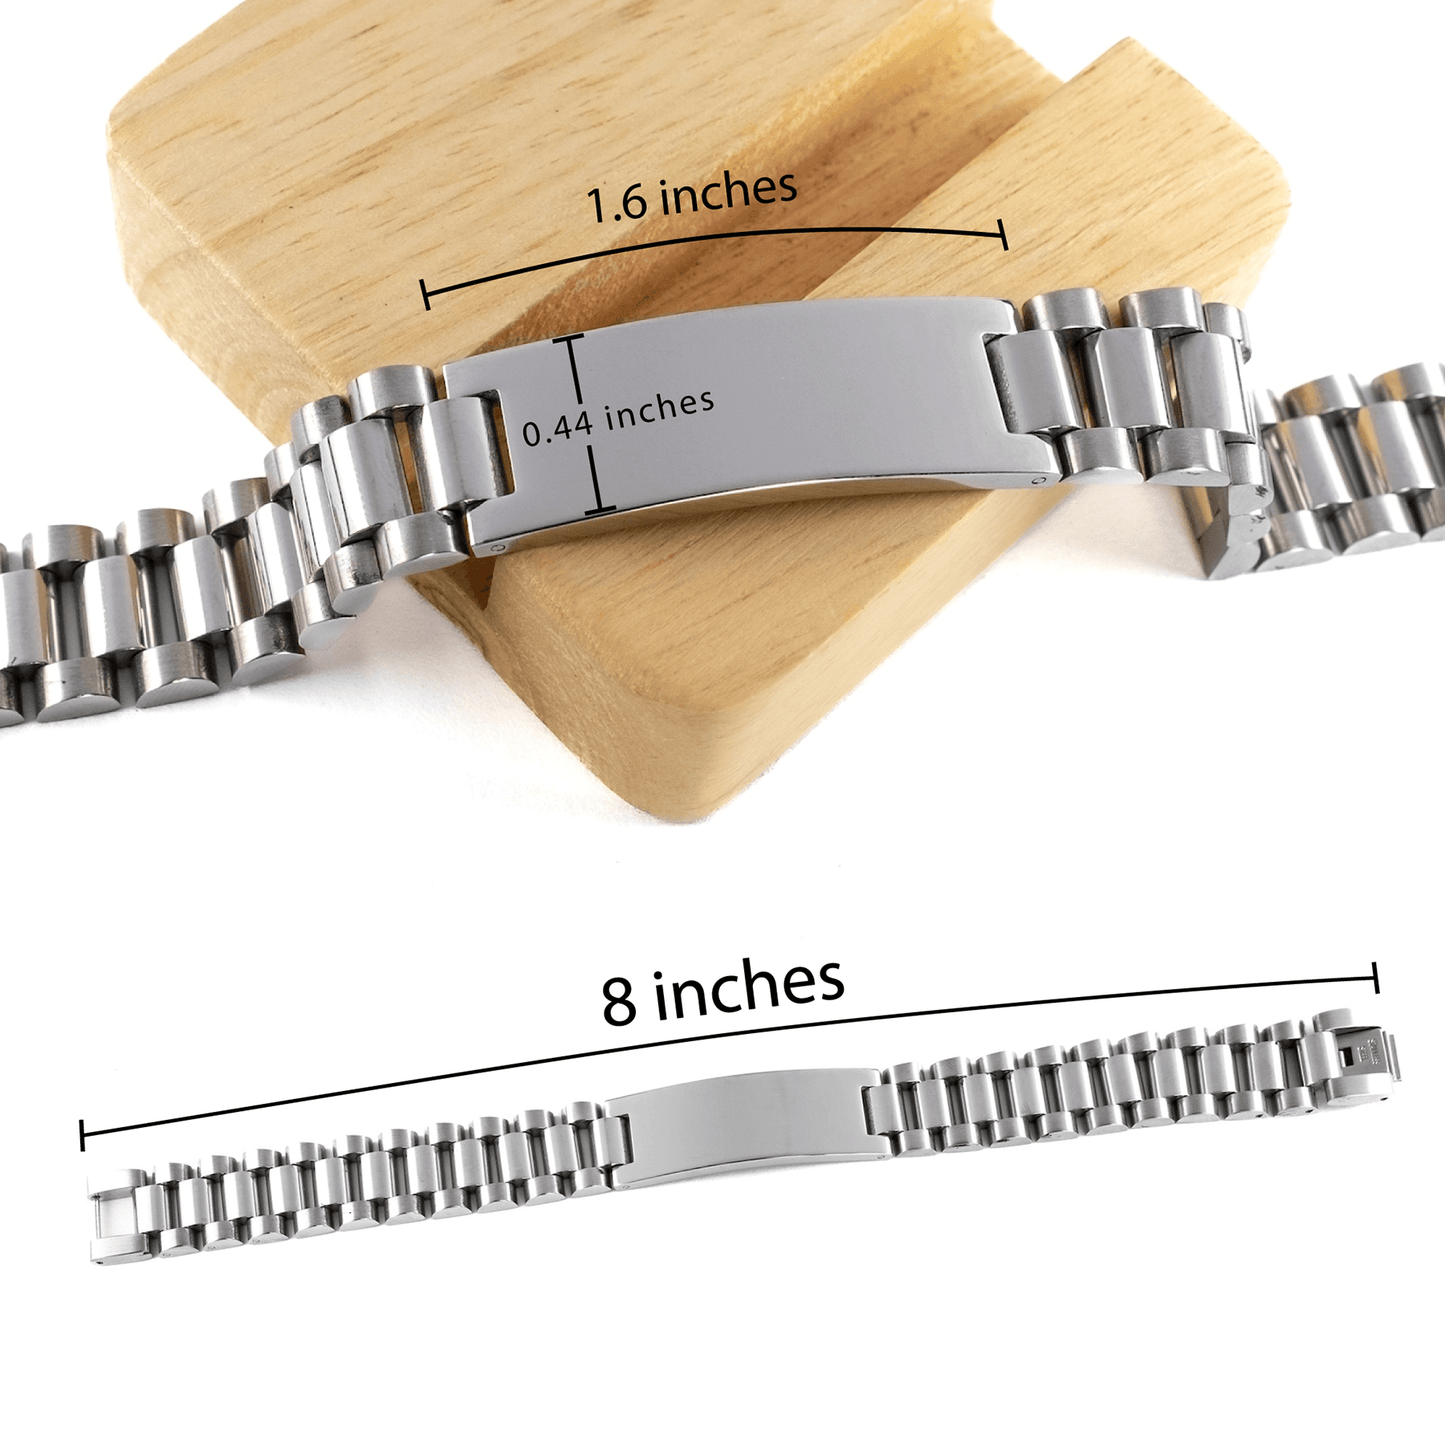 Biologist Ladder Stainless Steel Engraved Bracelet - Thanks for being who you are - Birthday Christmas Jewelry Gifts Coworkers Colleague Boss - Mallard Moon Gift Shop